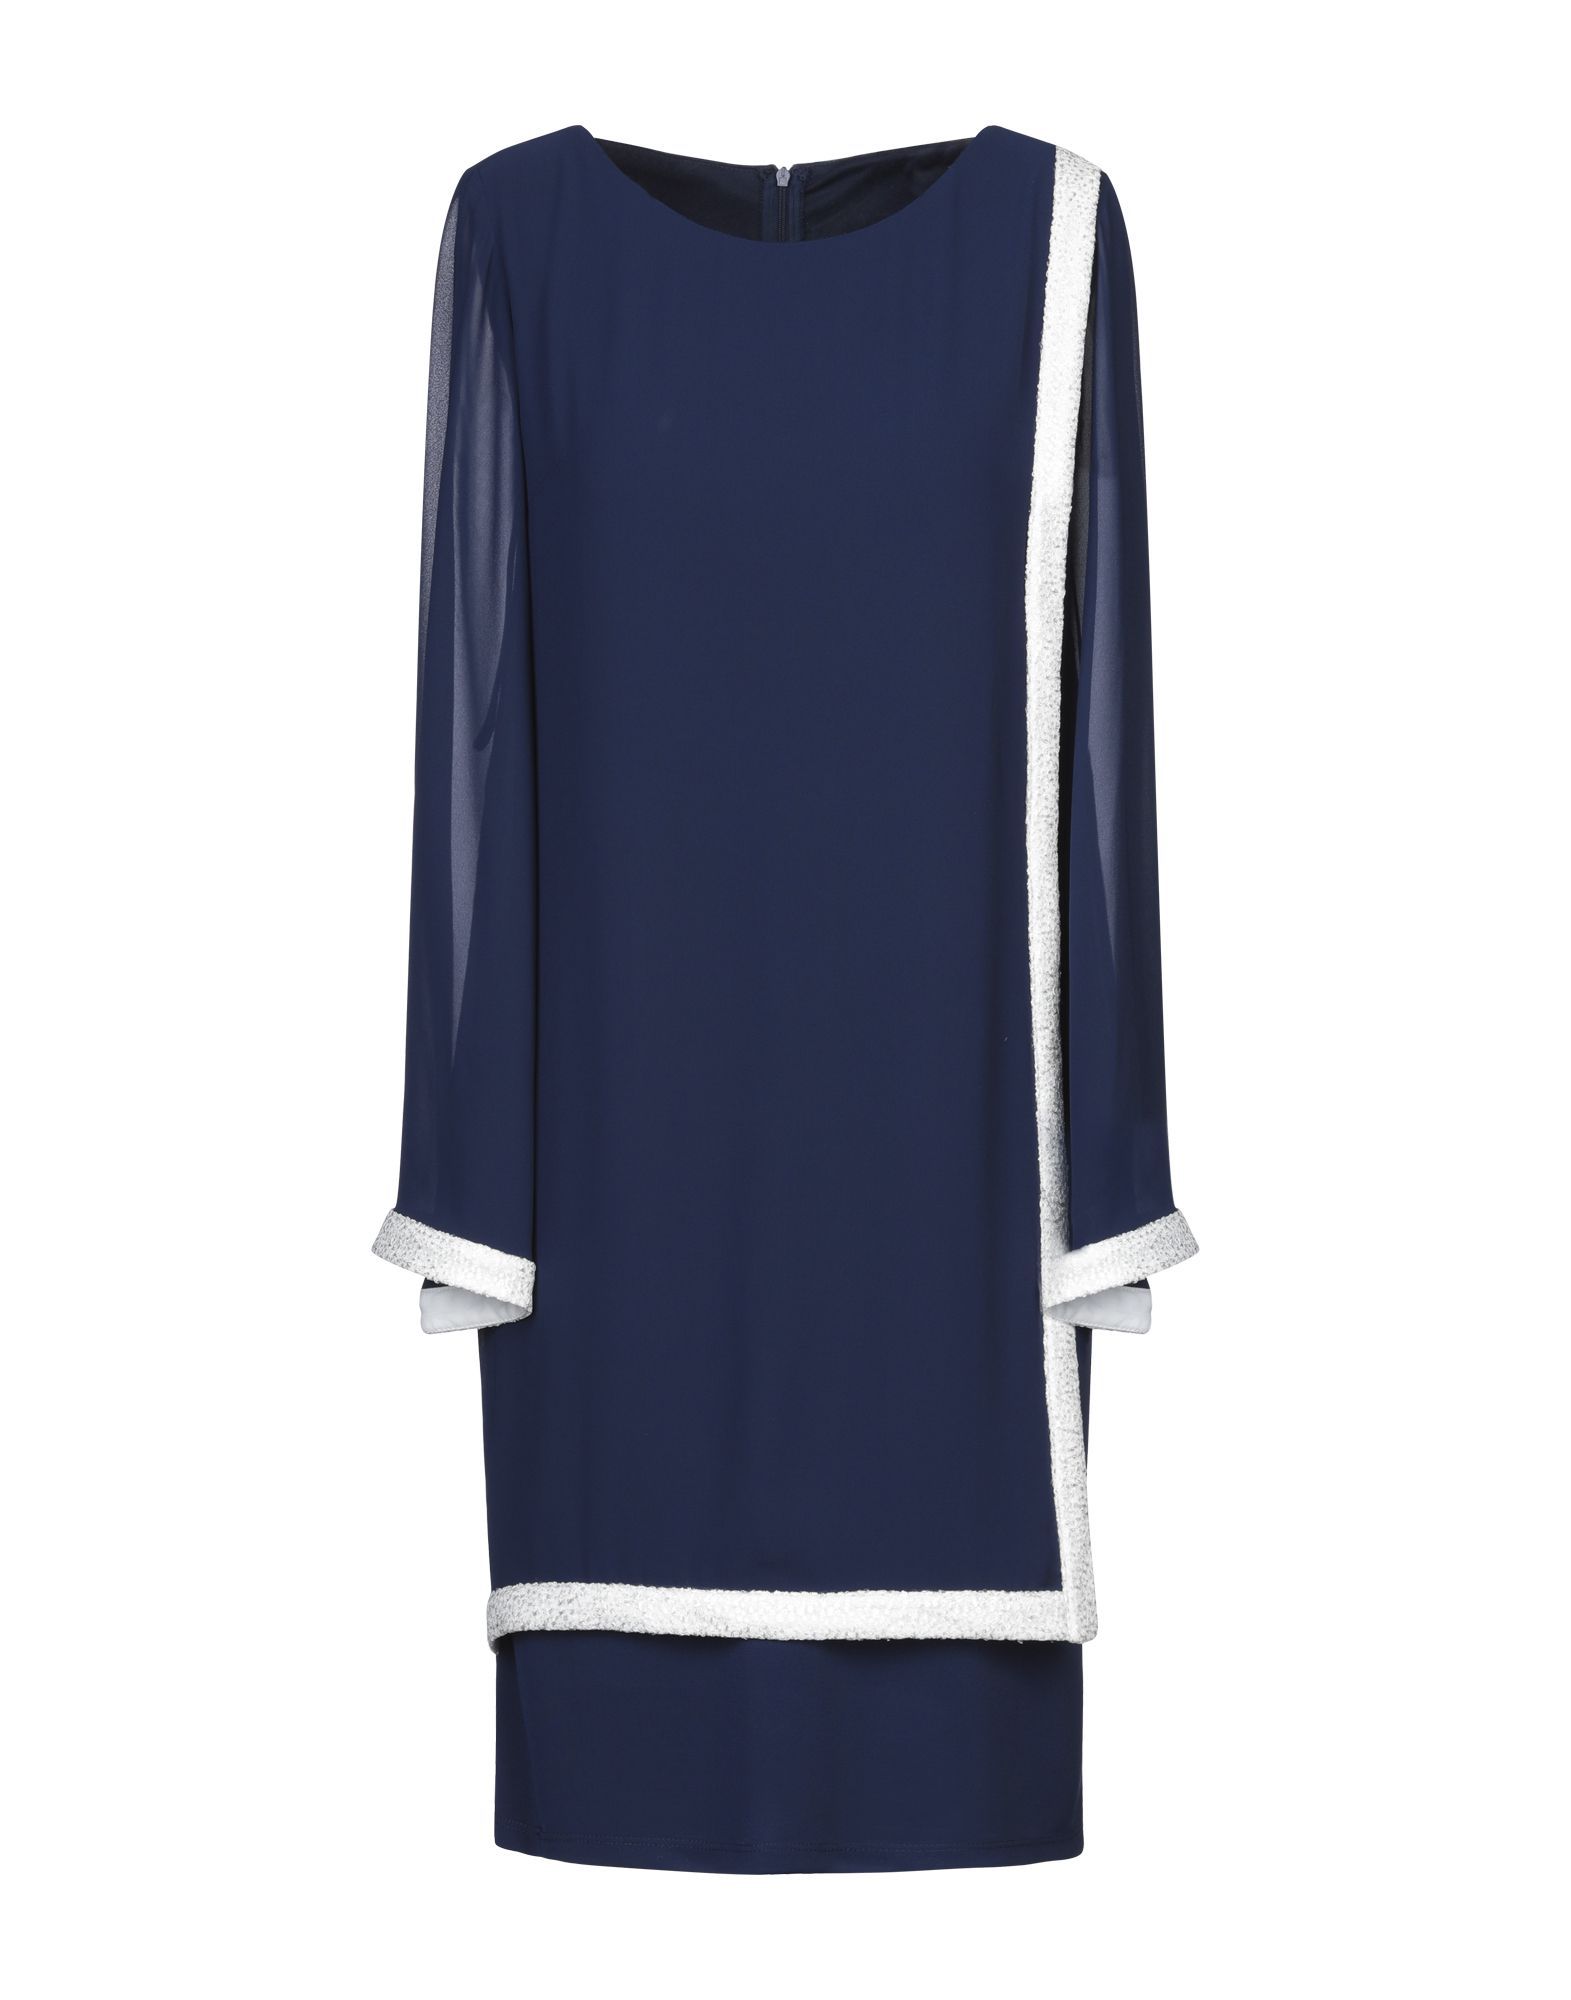 crepe, jersey, embroidered detailing, sequins, solid colour, round collar, long sleeves, no pockets, front closure, hook-and-bar, zip, fully lined